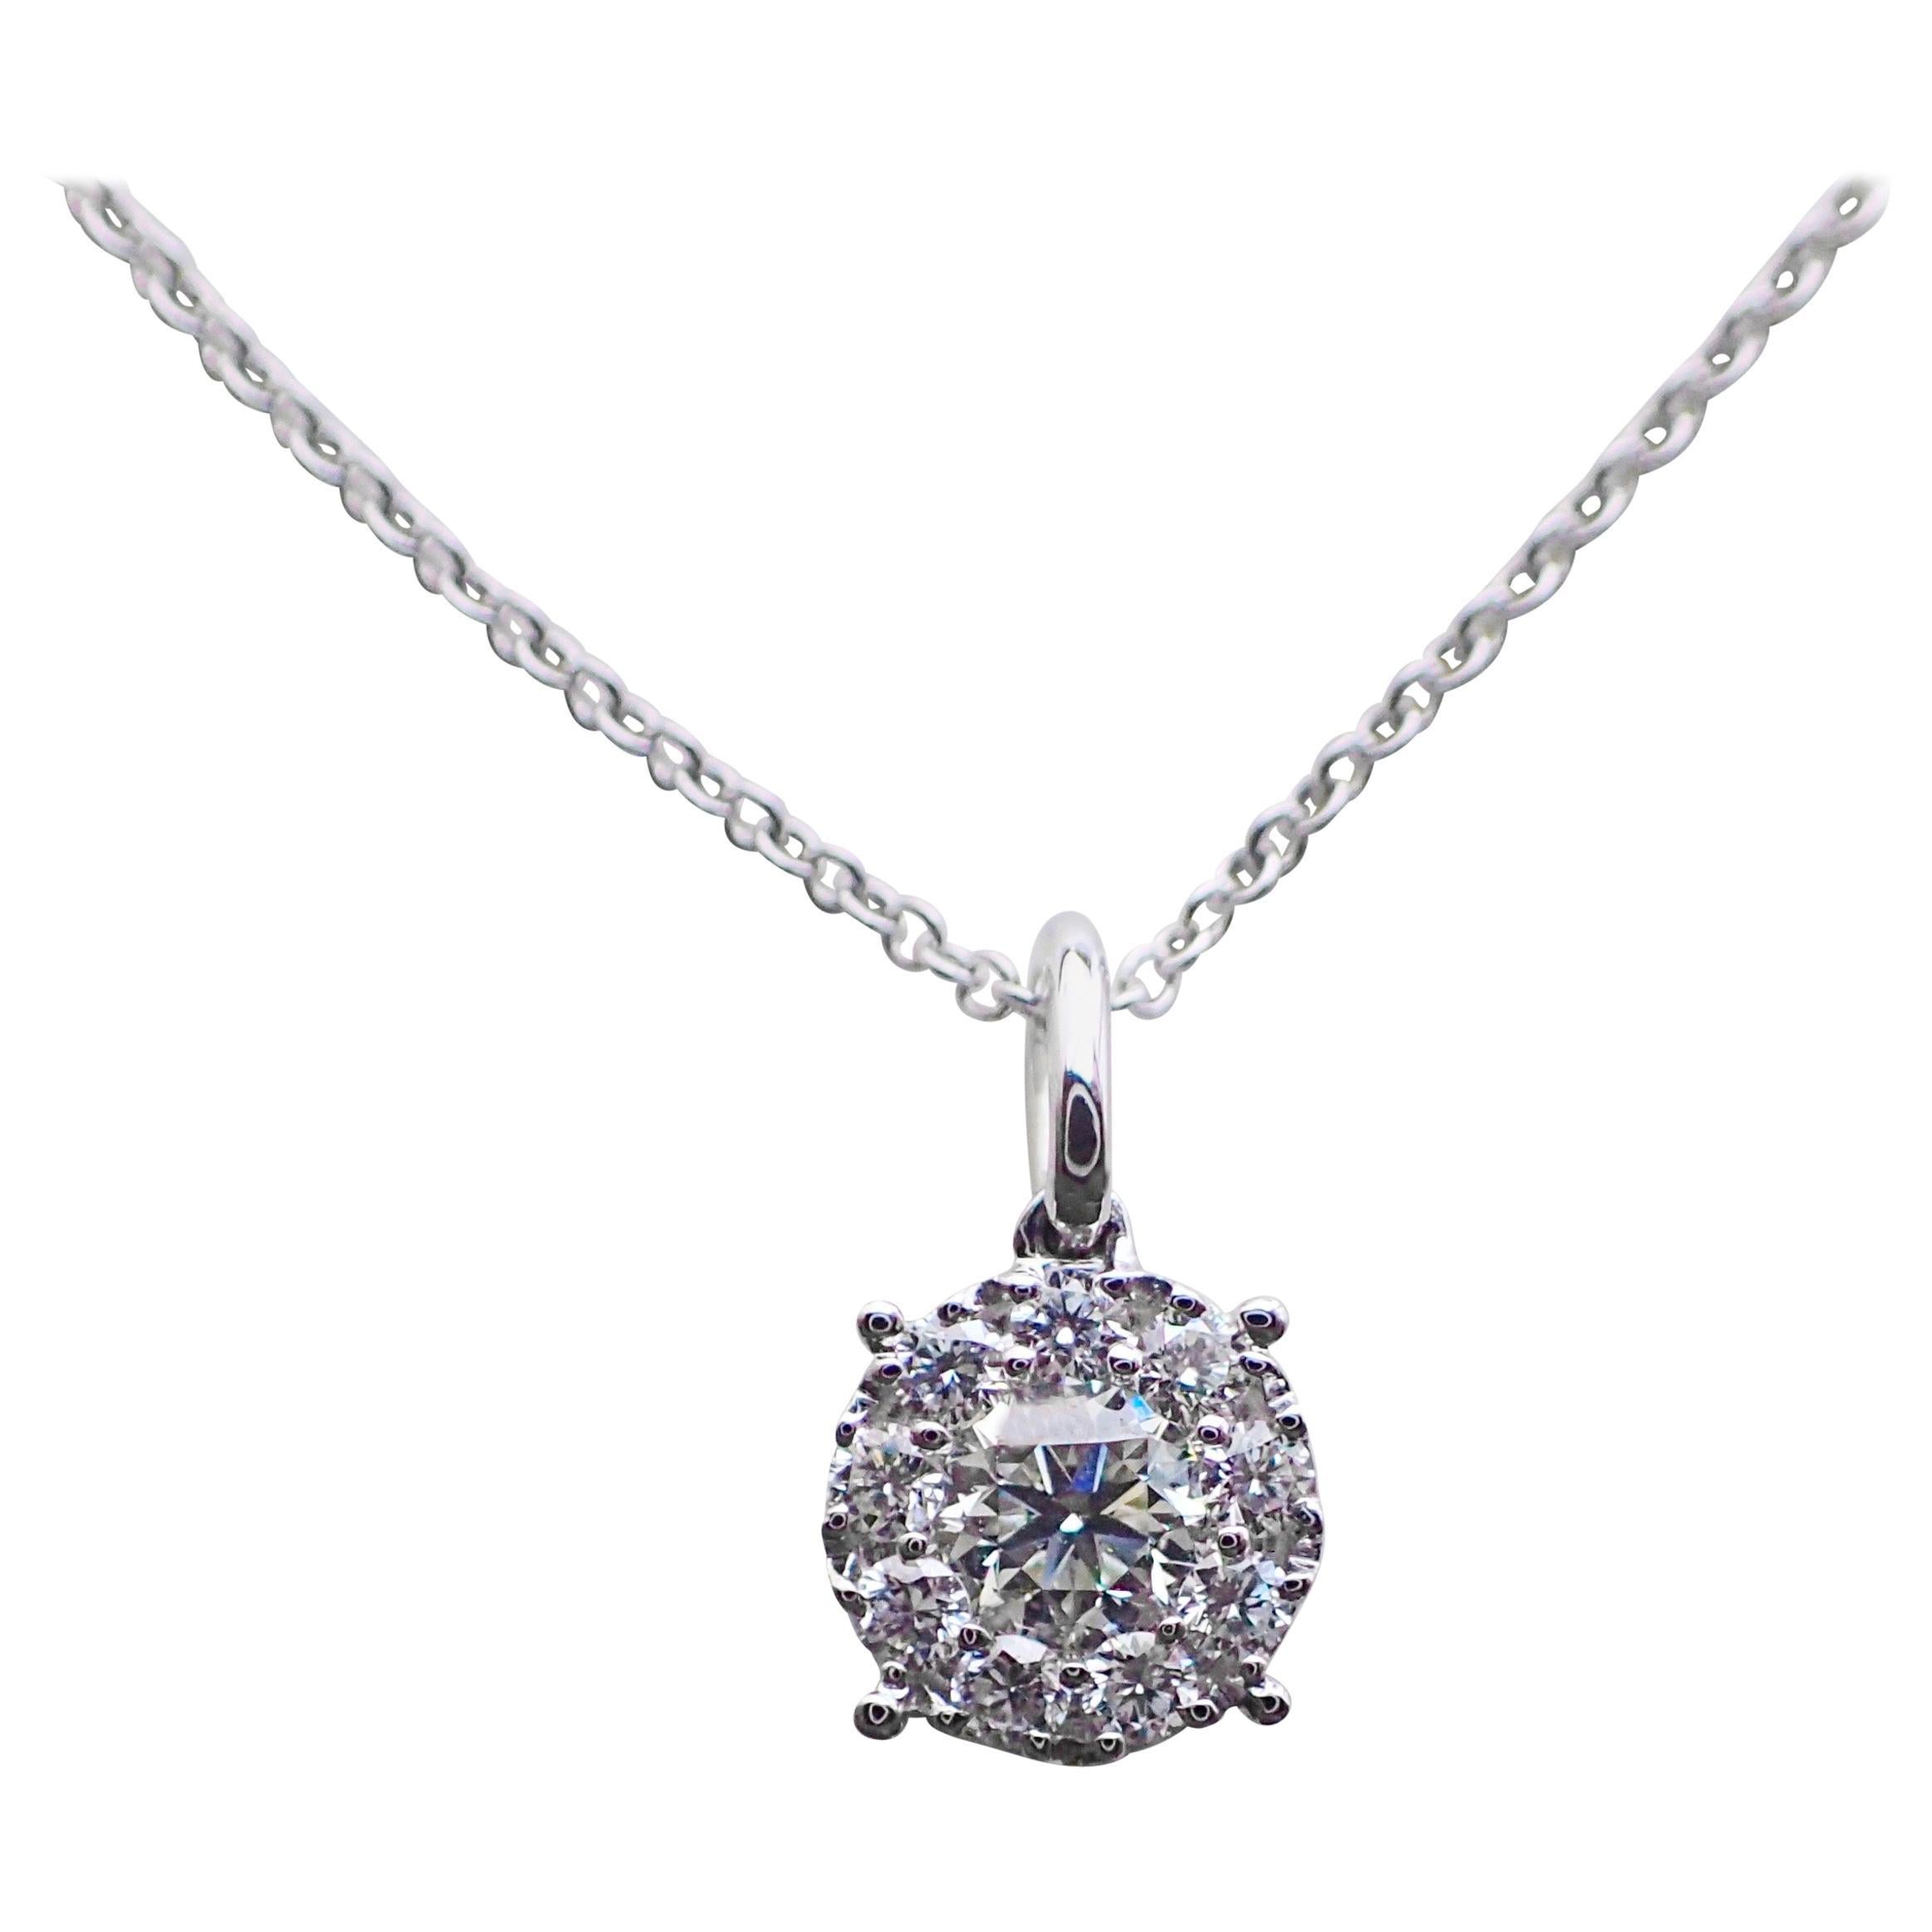 Round Pendant with 0.46 Carat of Diamond Hangs from an 18 Karat White Gold Chain For Sale